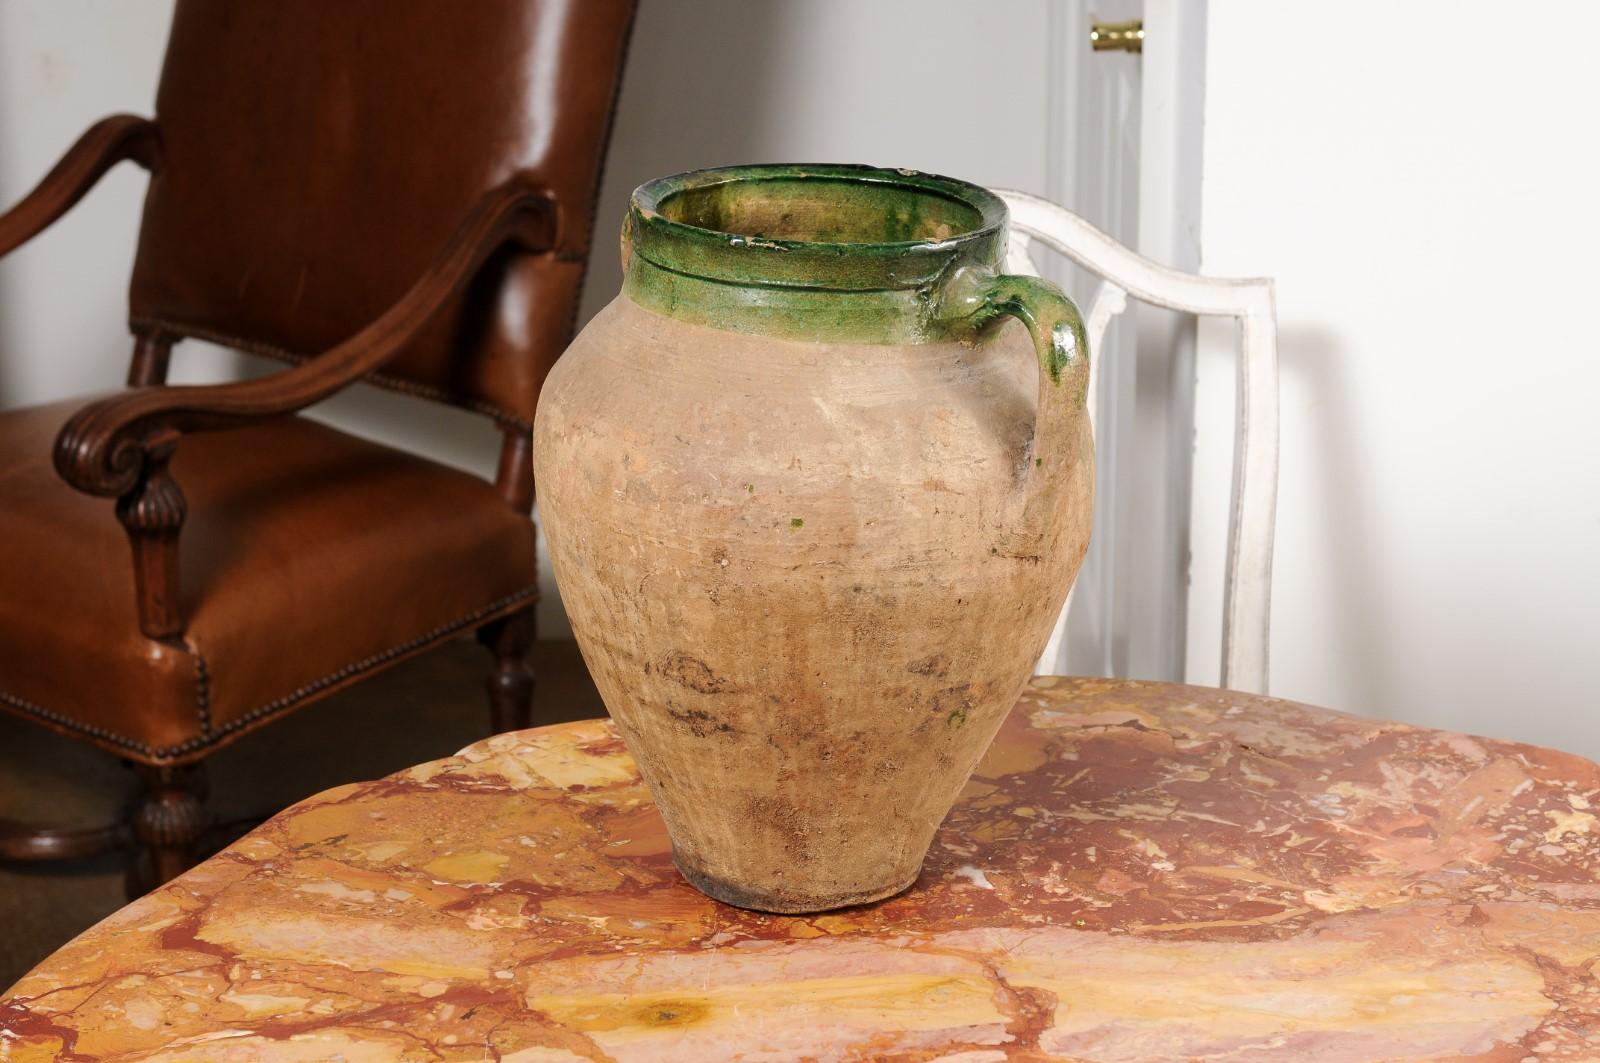 English Rustic 1930s Terracotta Olive Oil Jar Circa 1930 with Green Glazed Top For Sale 1